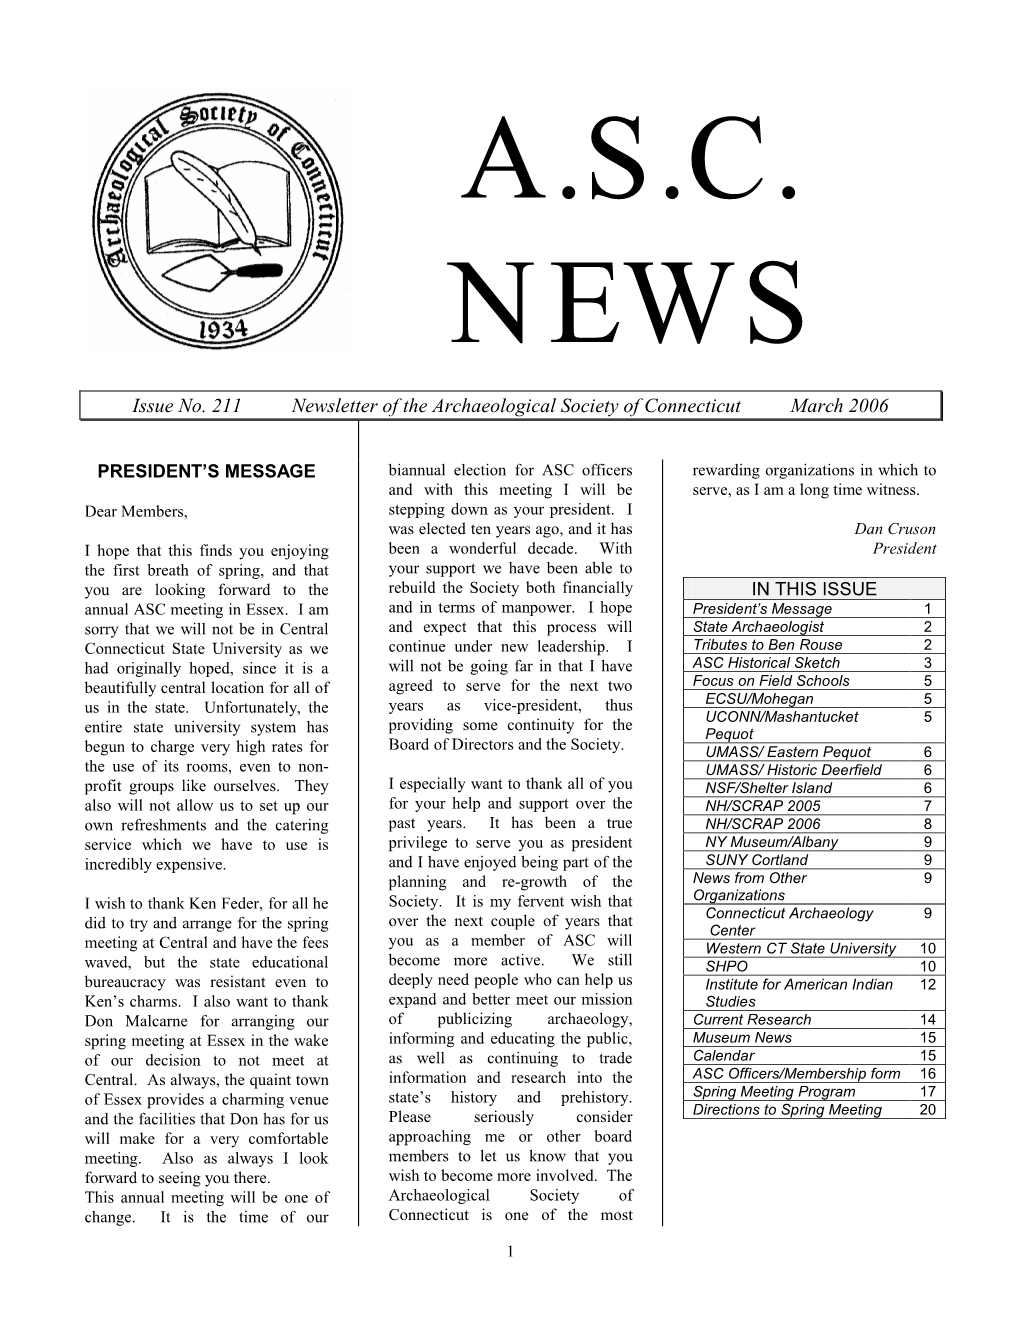 ASC News Is E-Mail: Hdjul@Conncoll.Edu to the Extent Allowed by Law